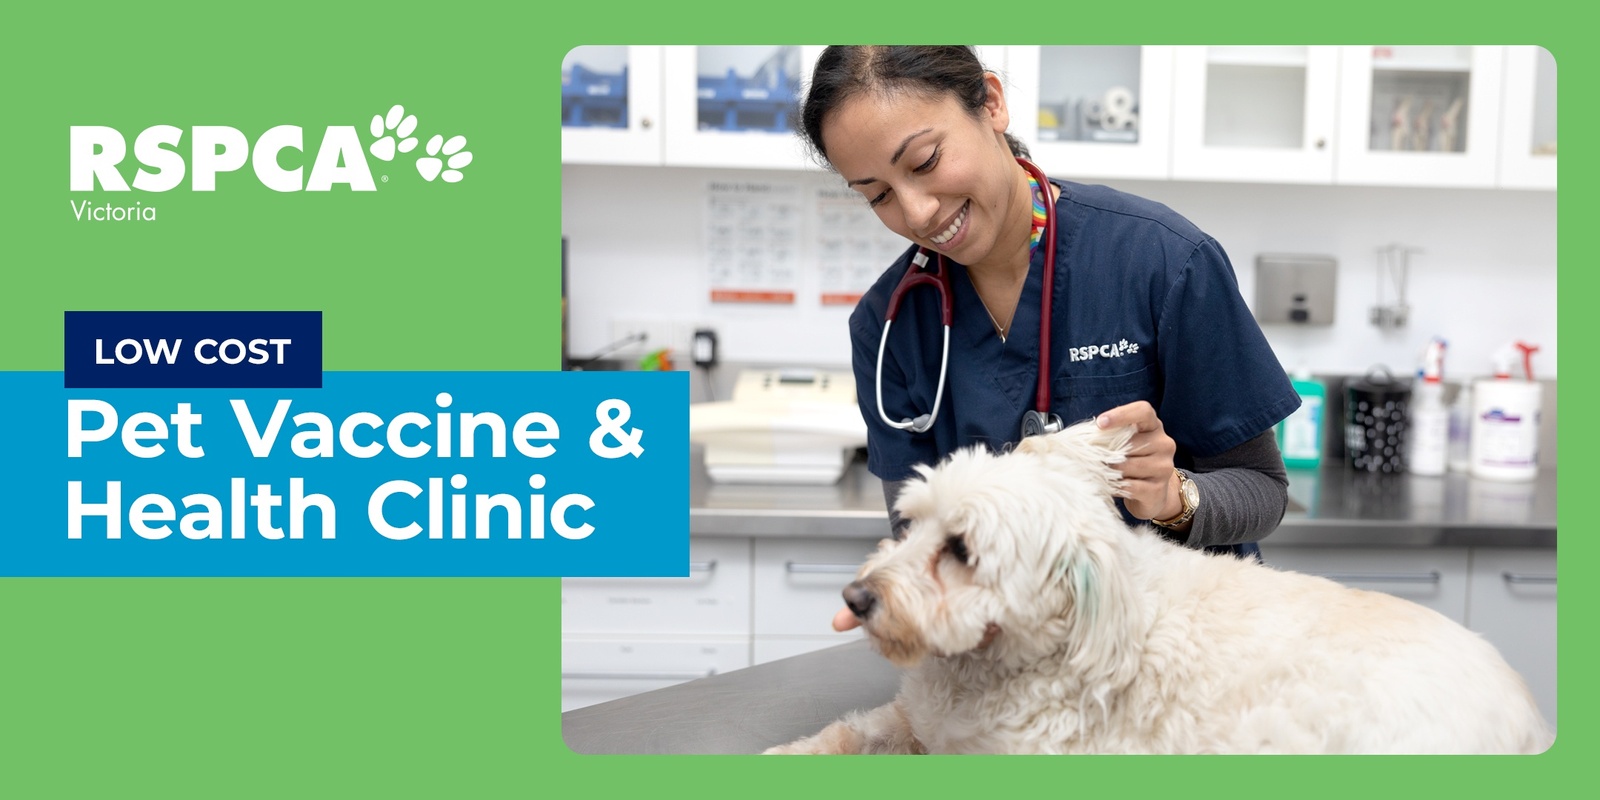 Banner image for RSPCA Pet Vaccination Event at Greenvale West Community Centre - June